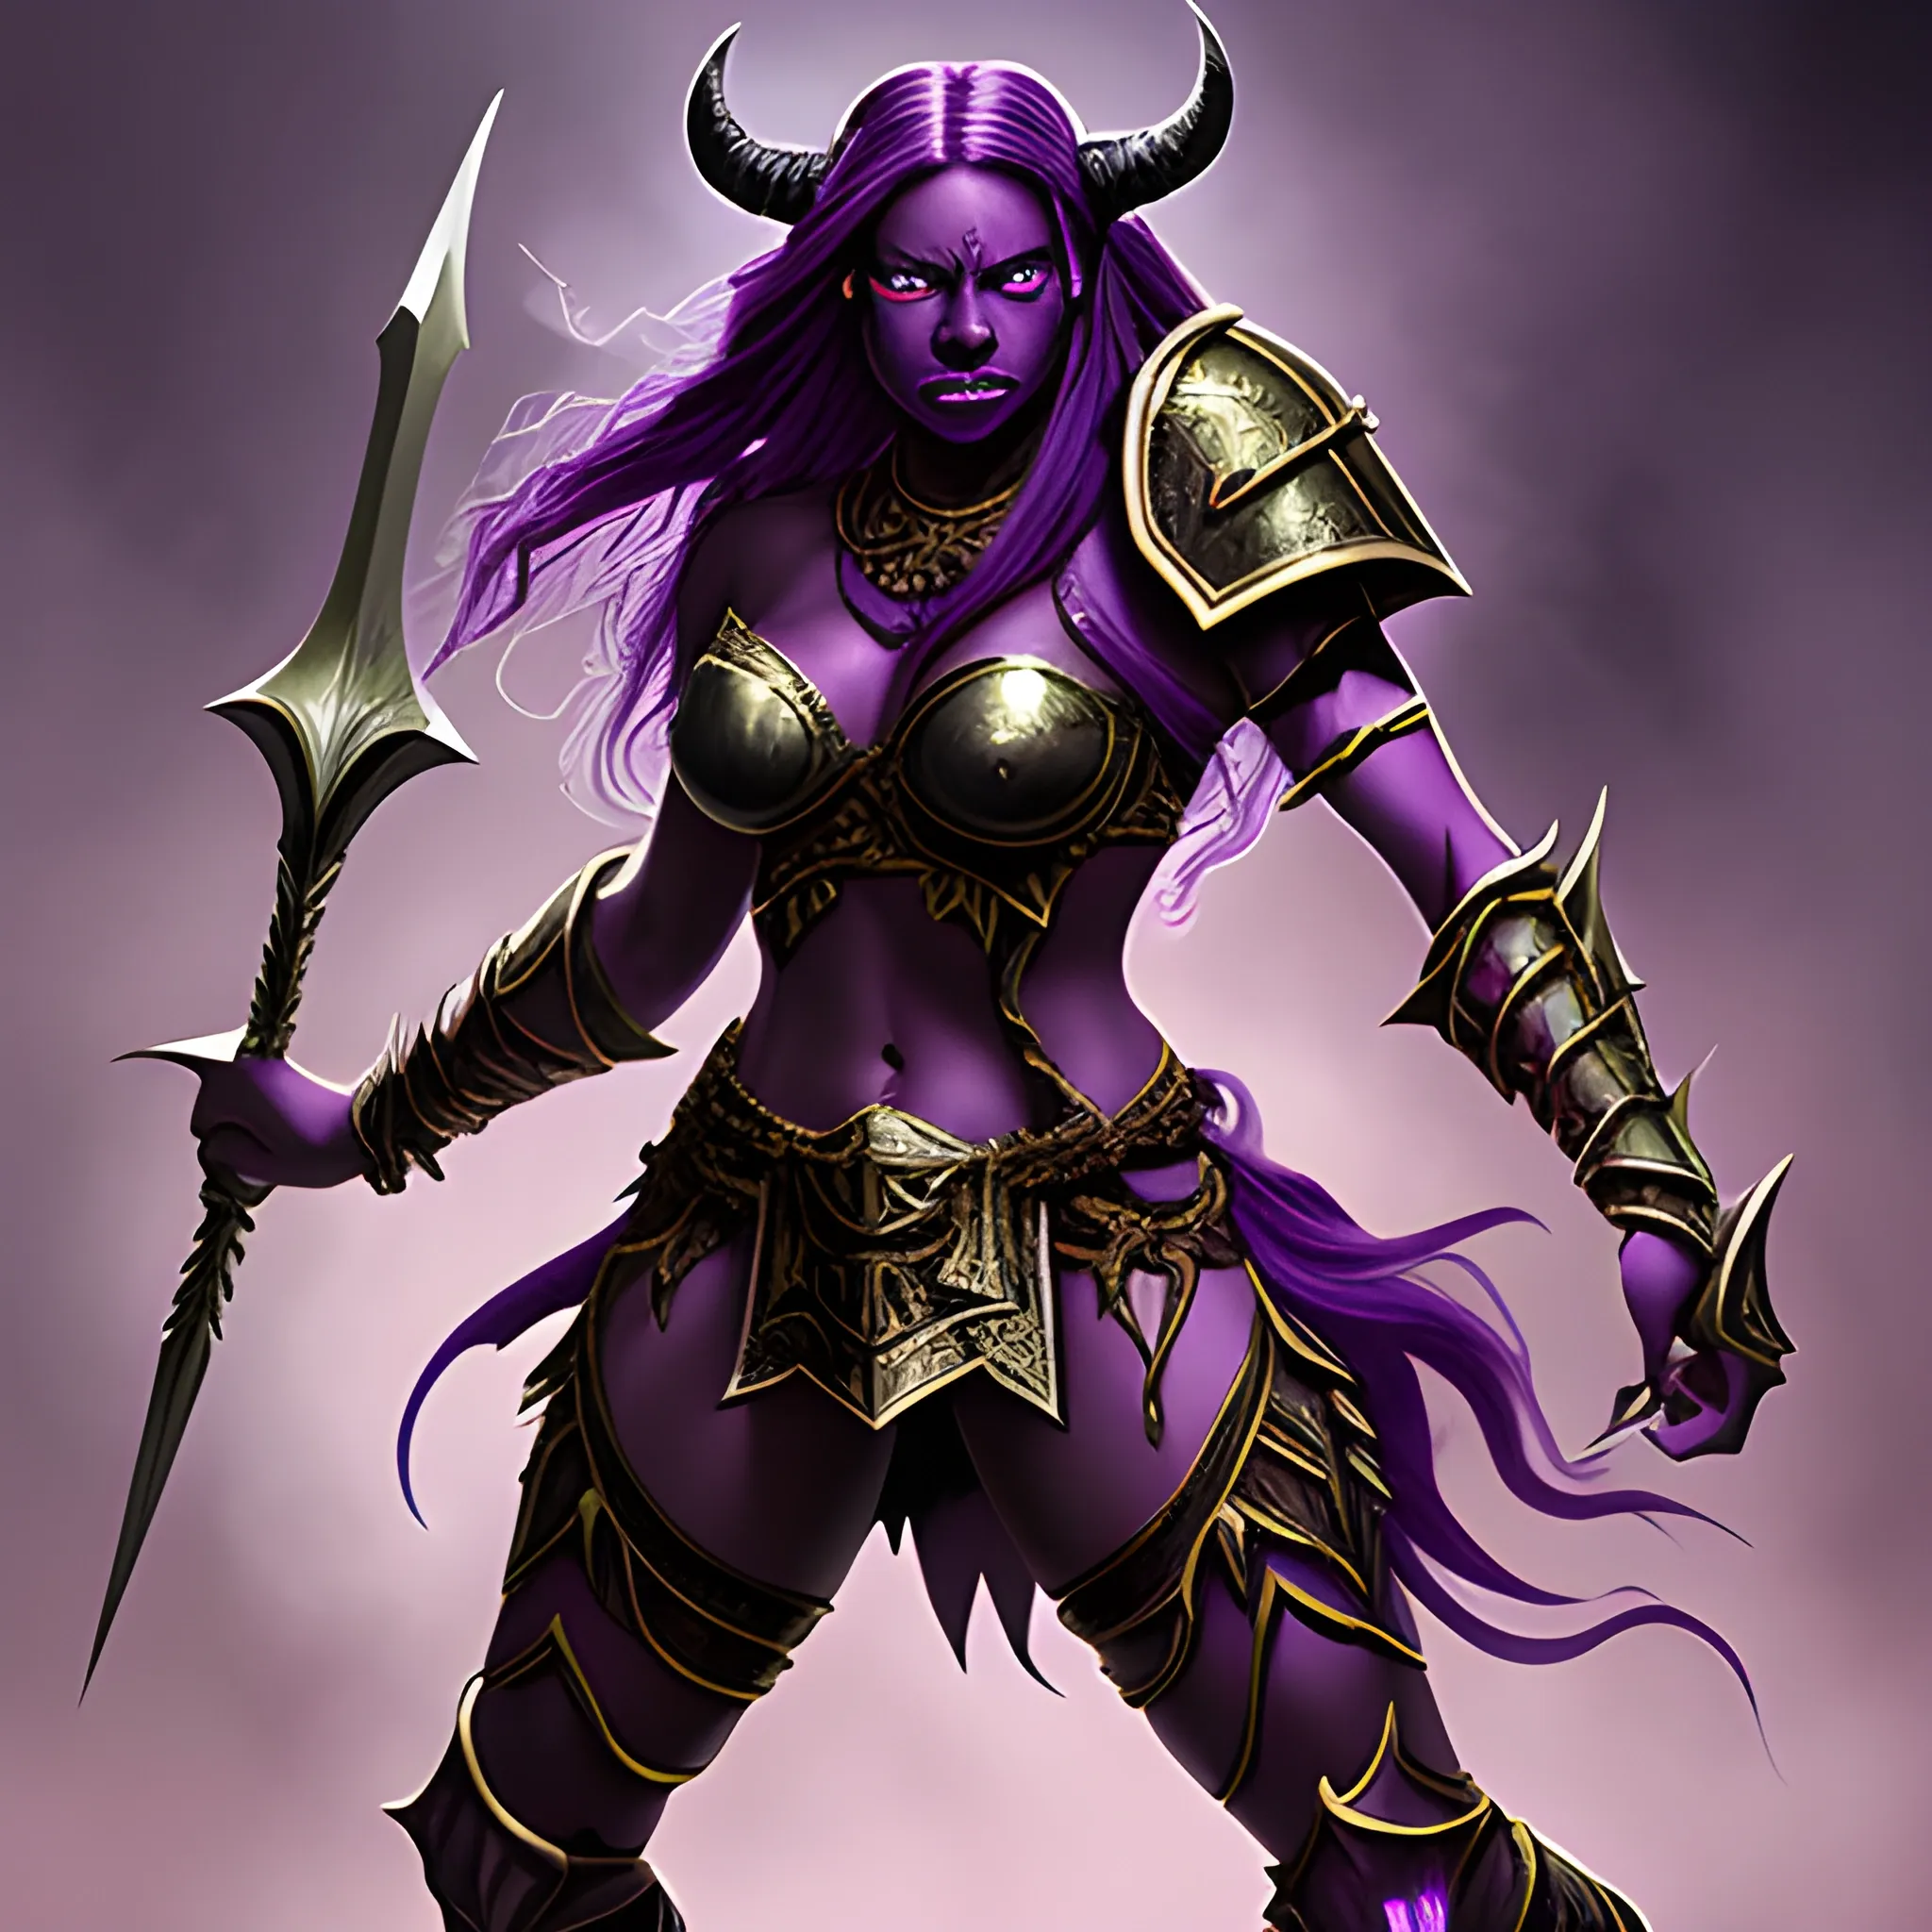 high fantasy D&D, intimidating dark skinned female demon with glowing eyes and long purple hair, in warrior armor